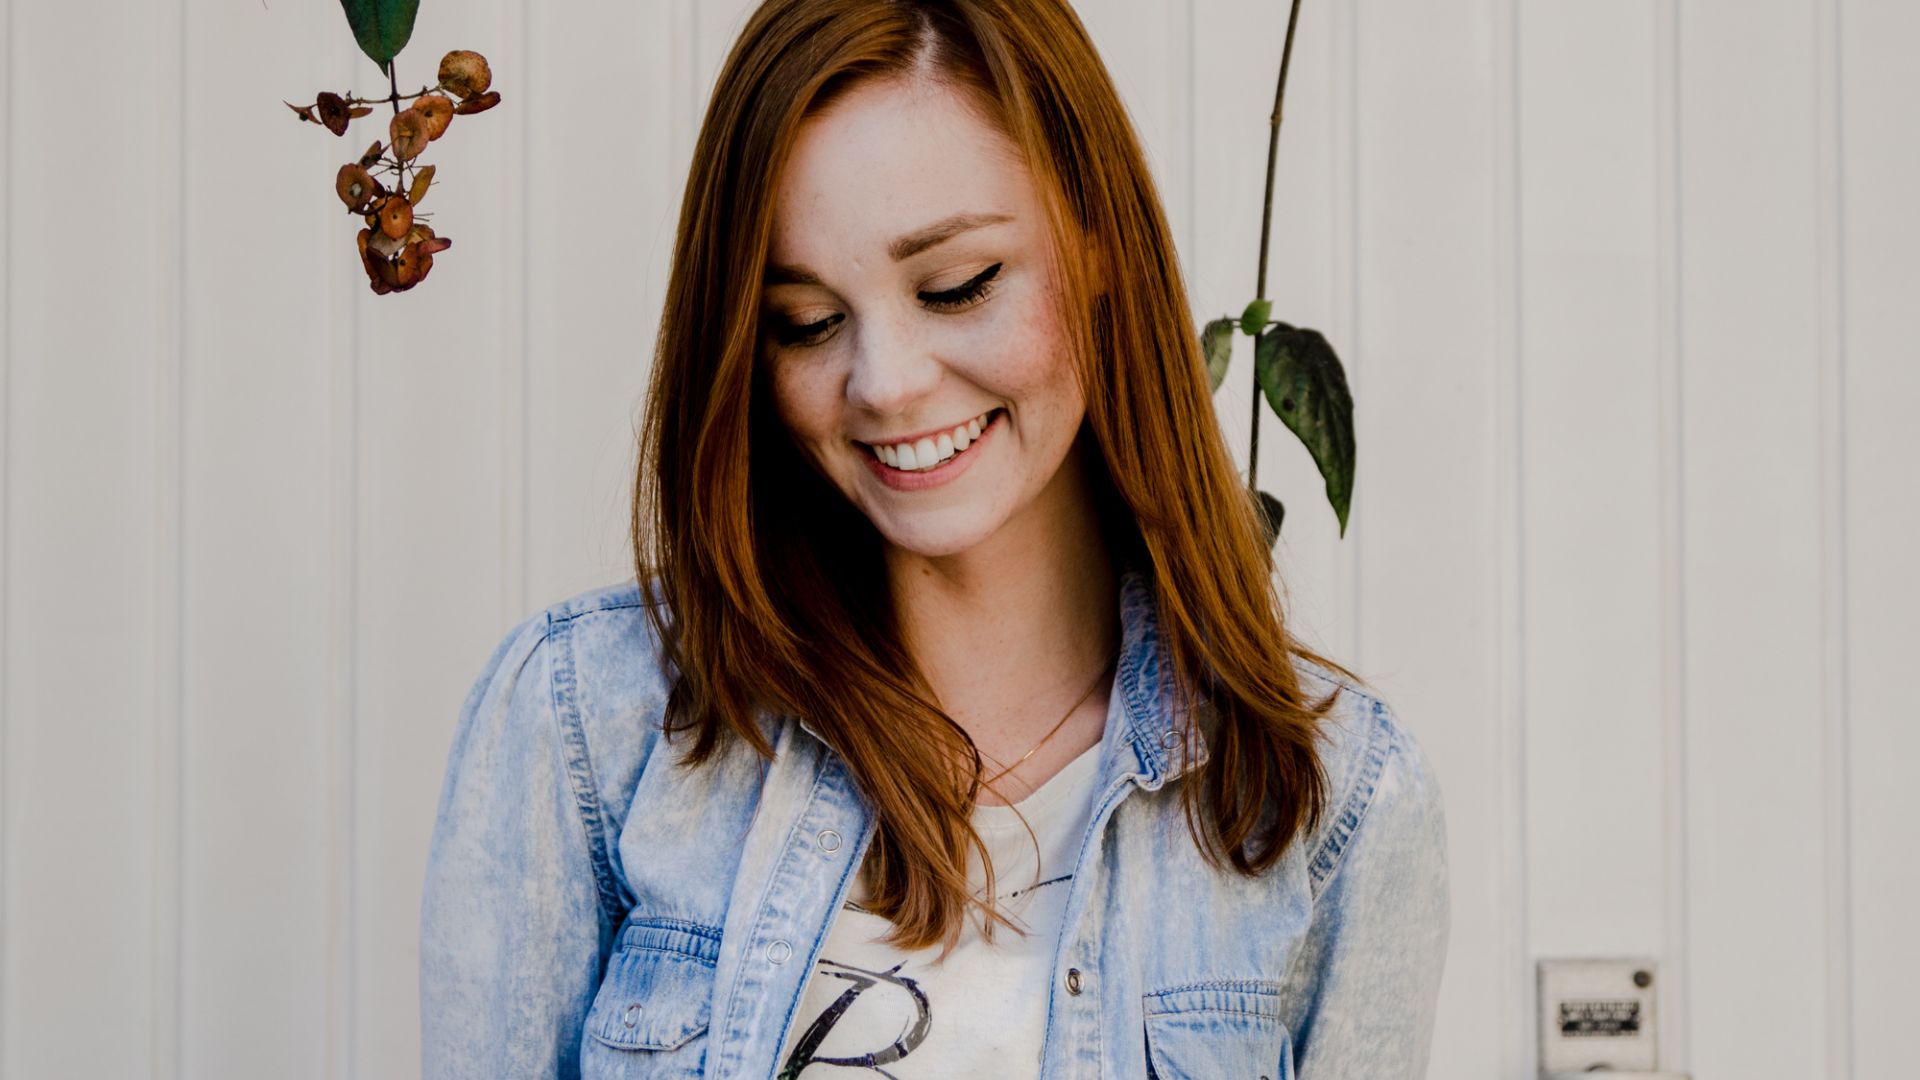 Wallpaper Smile, red head, woman, jeans shirt